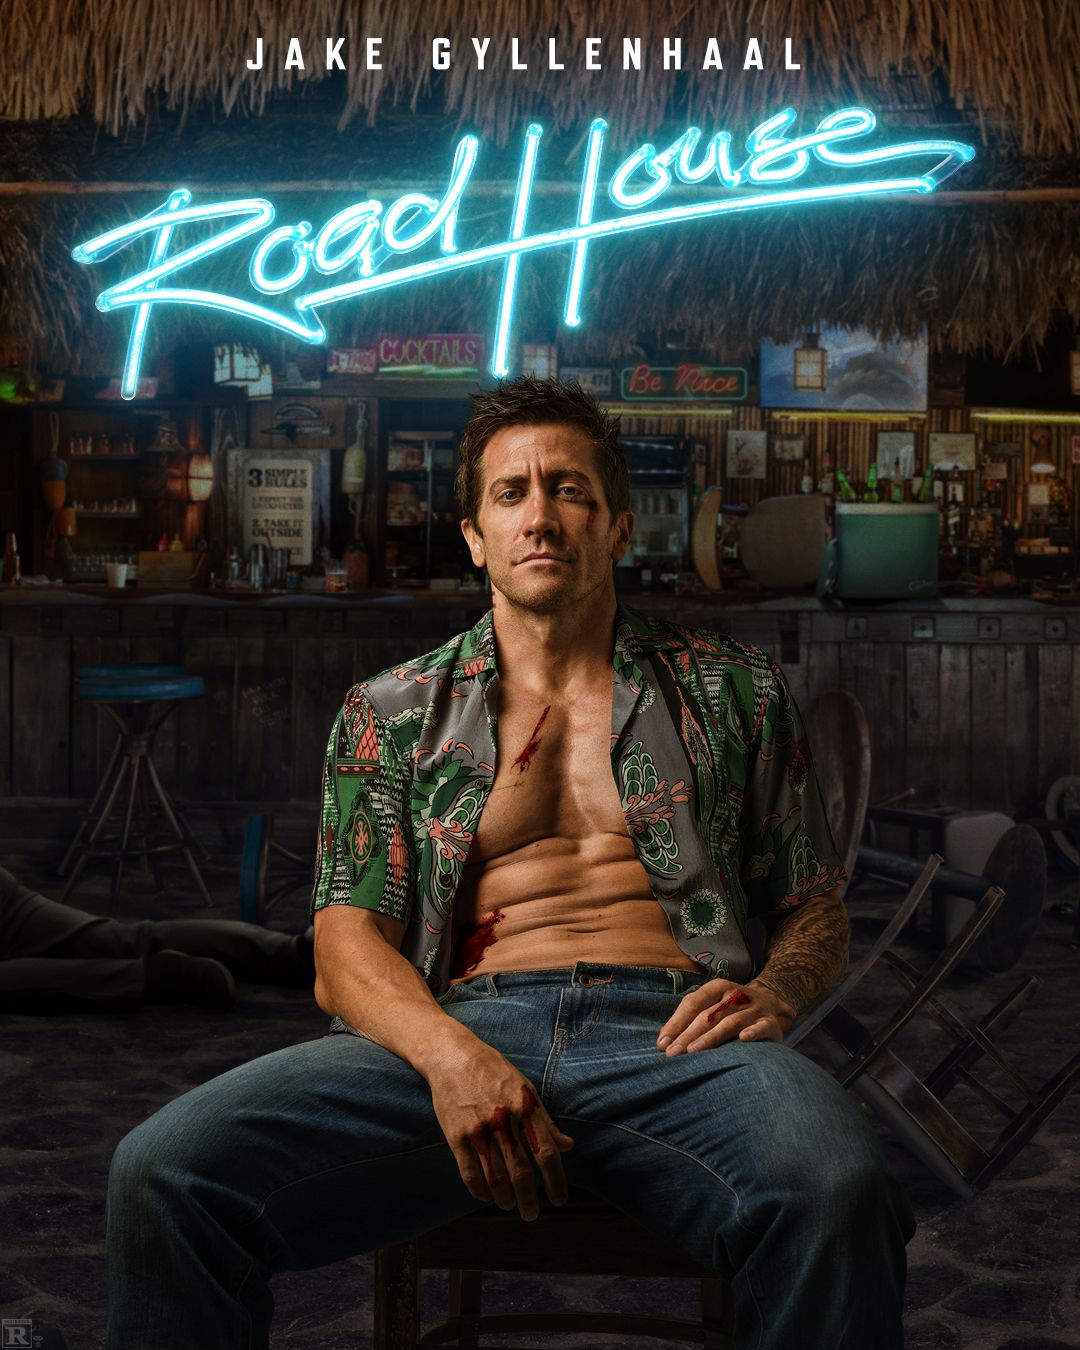 Jake Gyllenhaal’s Road House Character Revealed In Bloody, Easter Egg-Filled Remake Poster